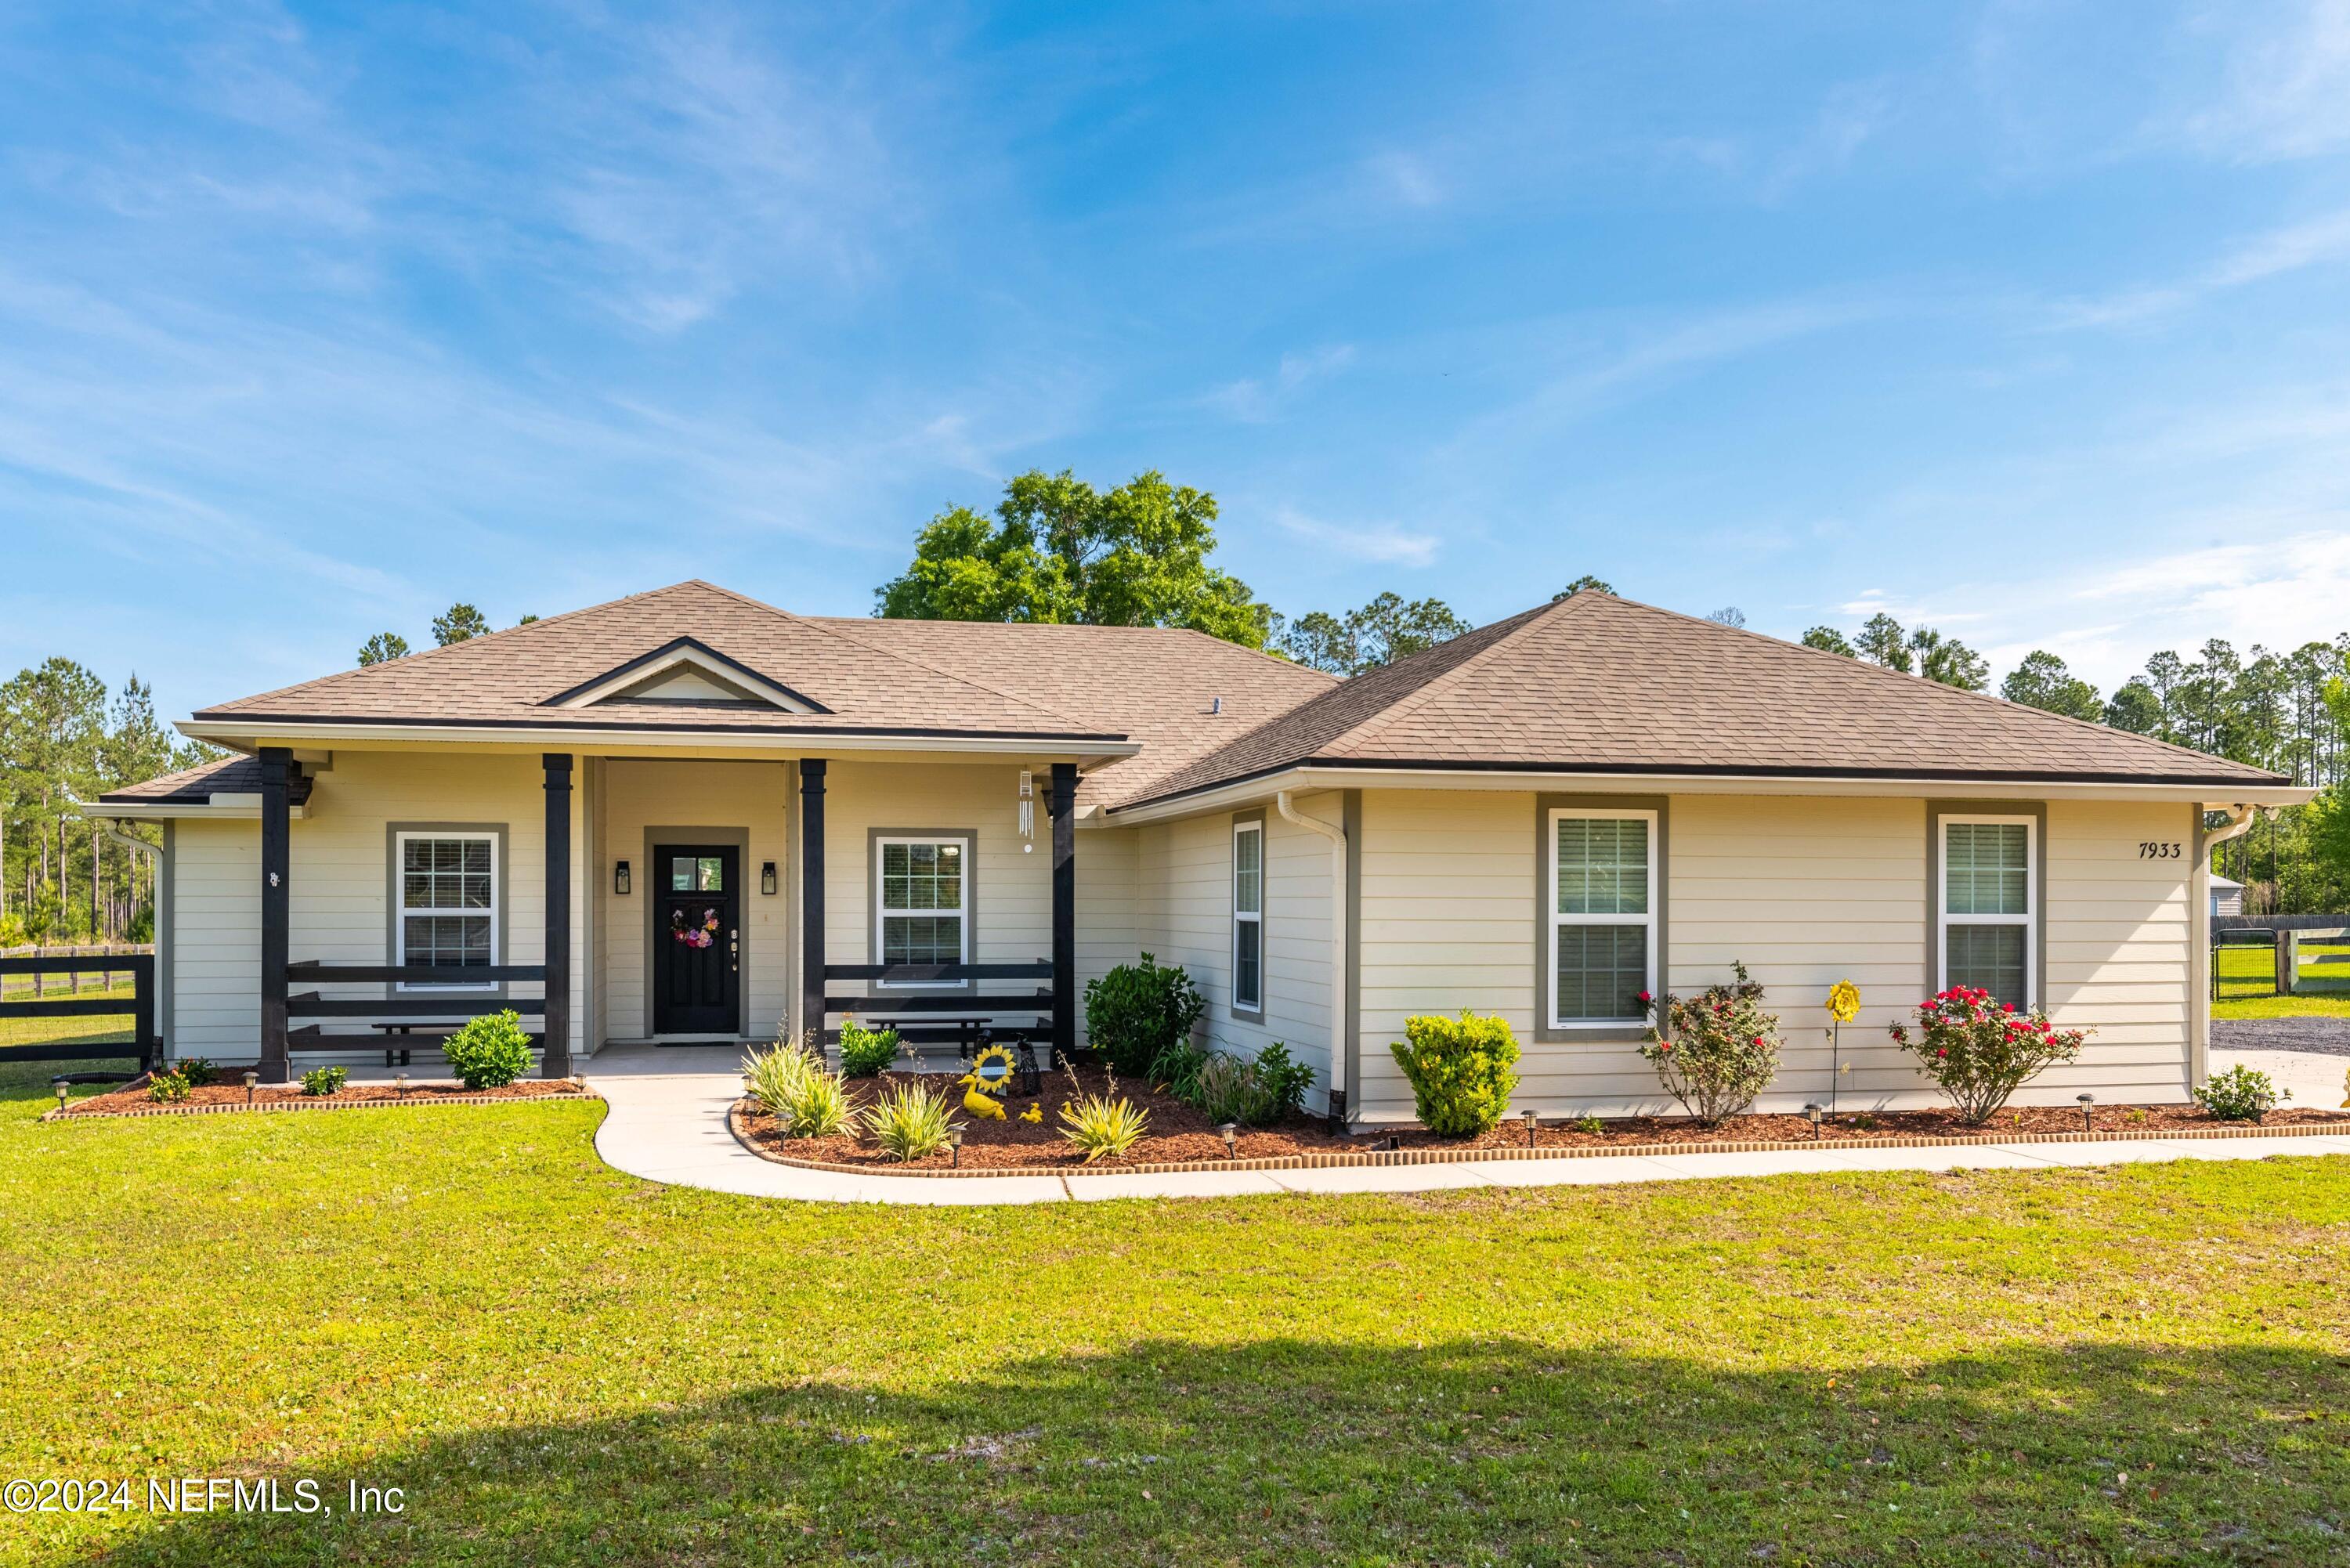 Glen St. Mary, FL home for sale located at 7933 Odis Yarborough Road, Glen St. Mary, FL 32040